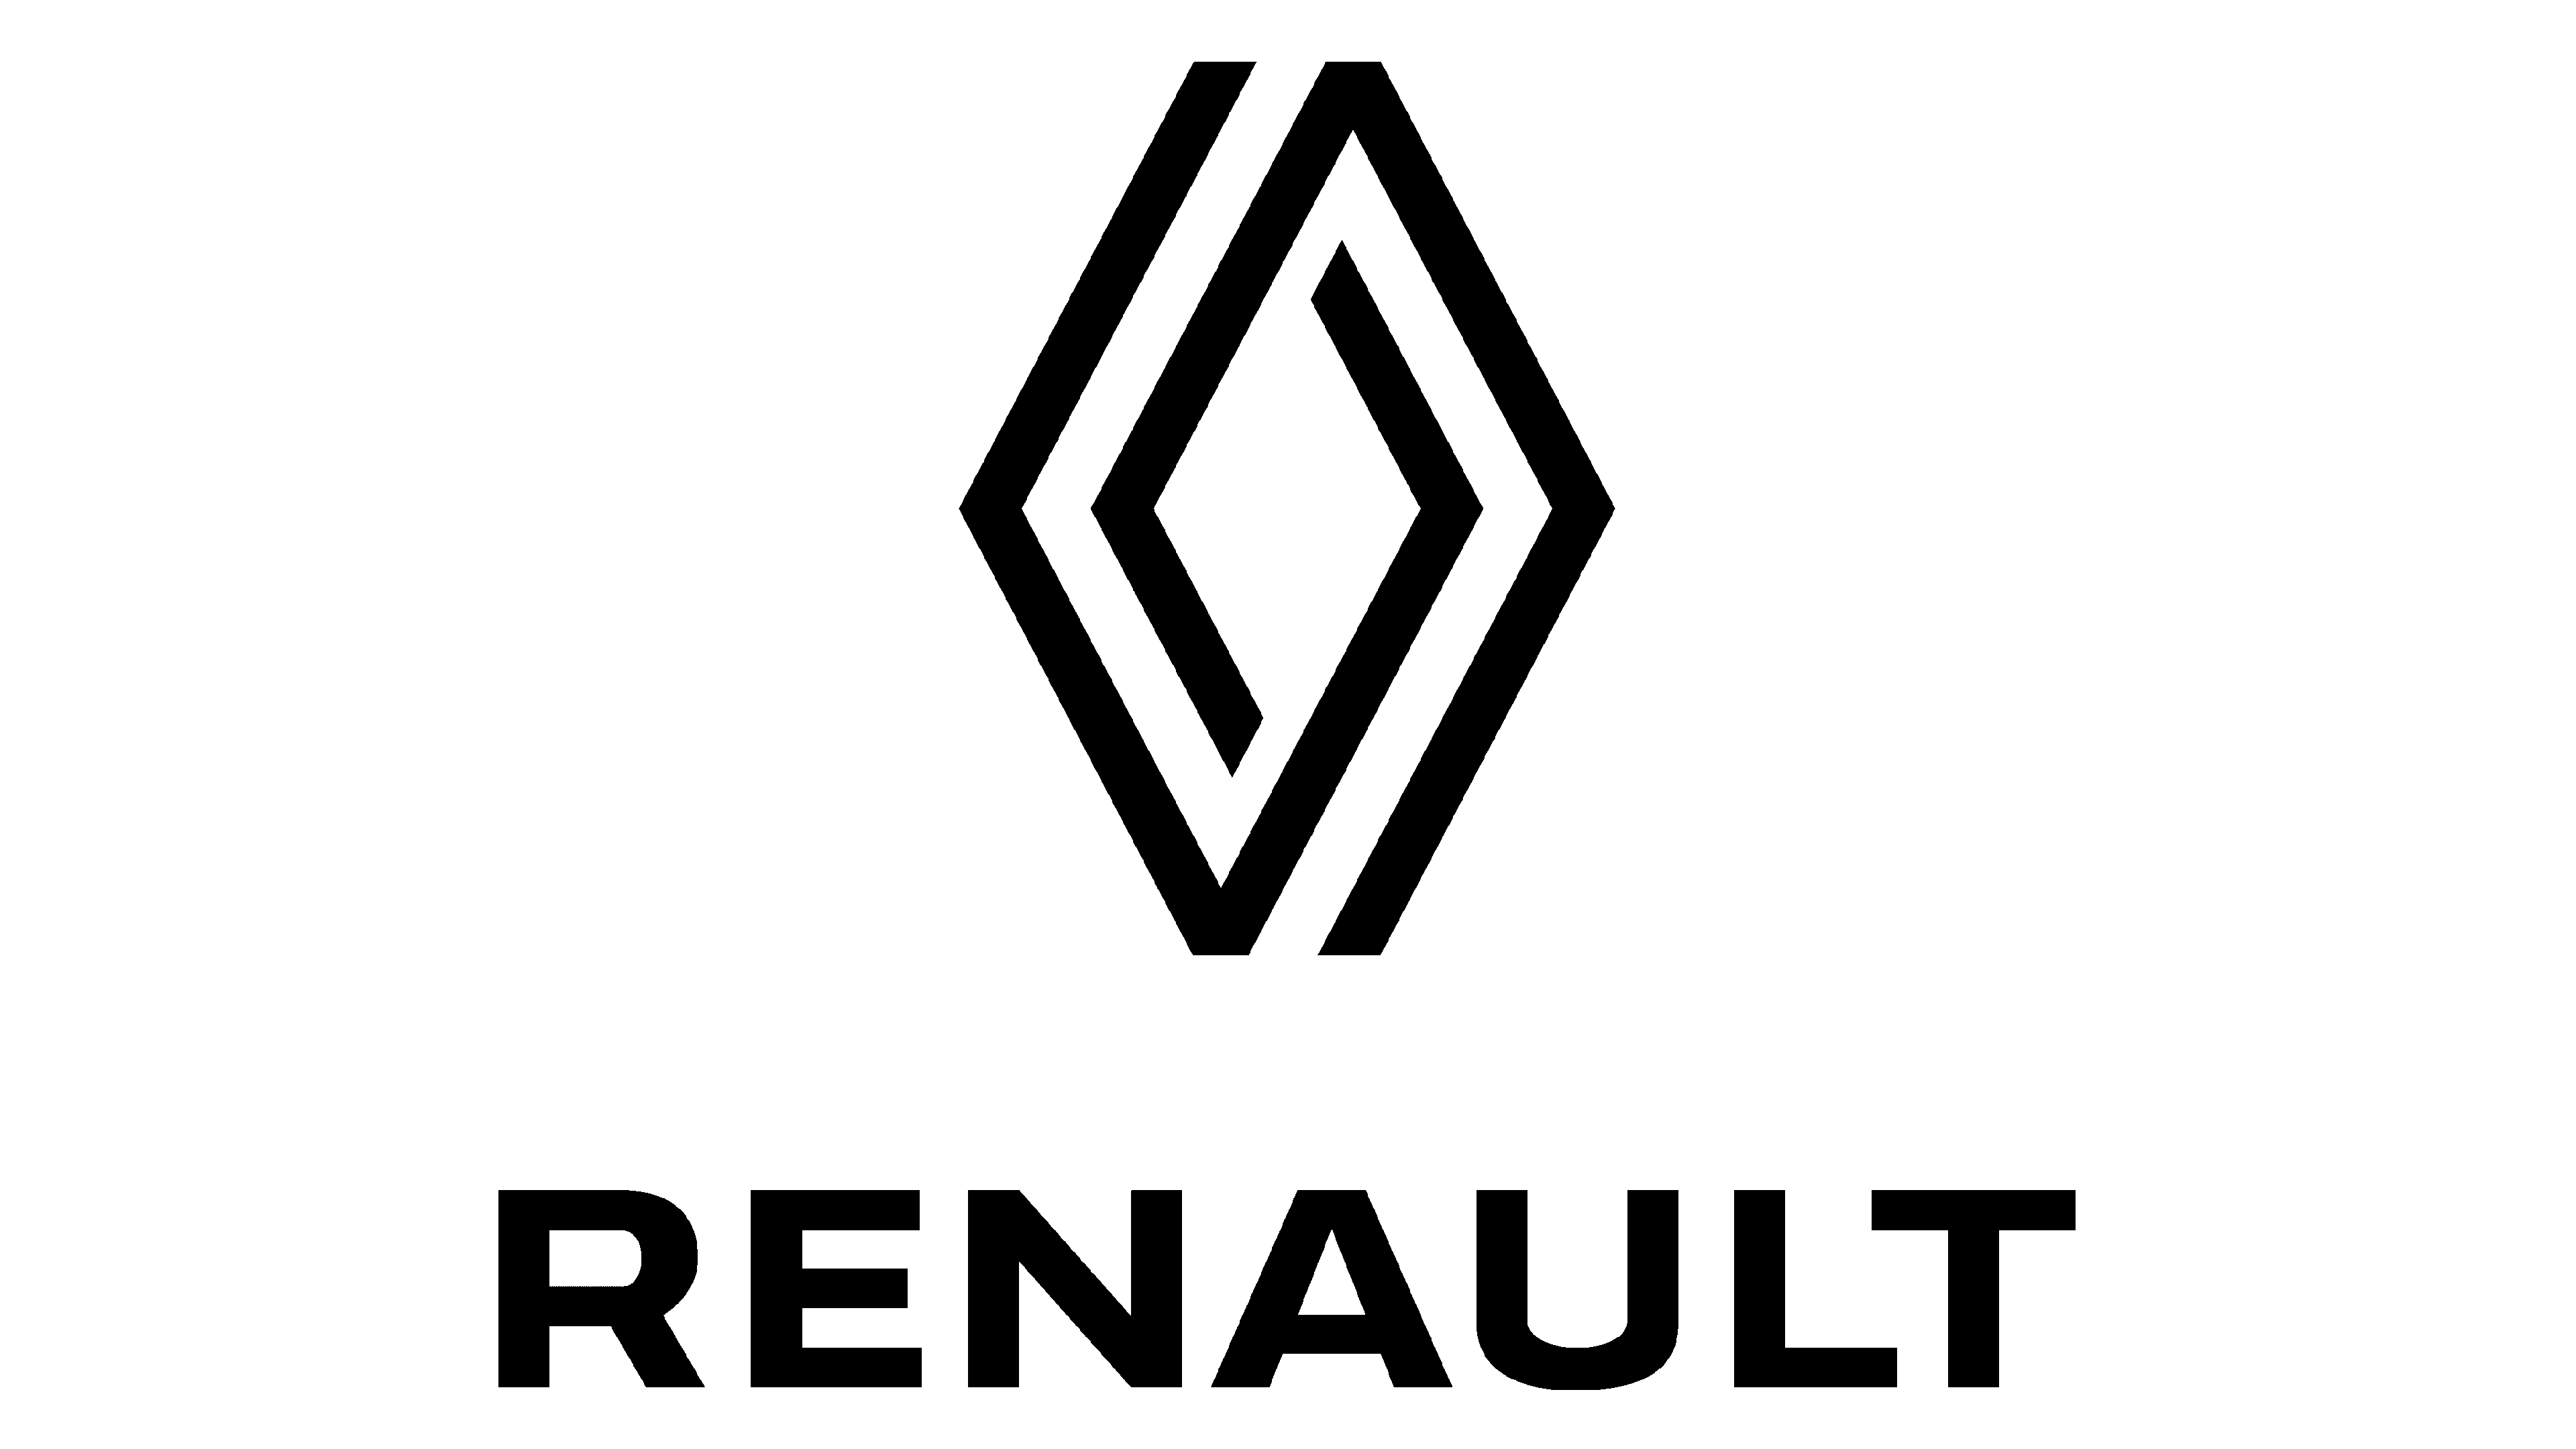 Renault Logo and symbol, meaning, history, sign.